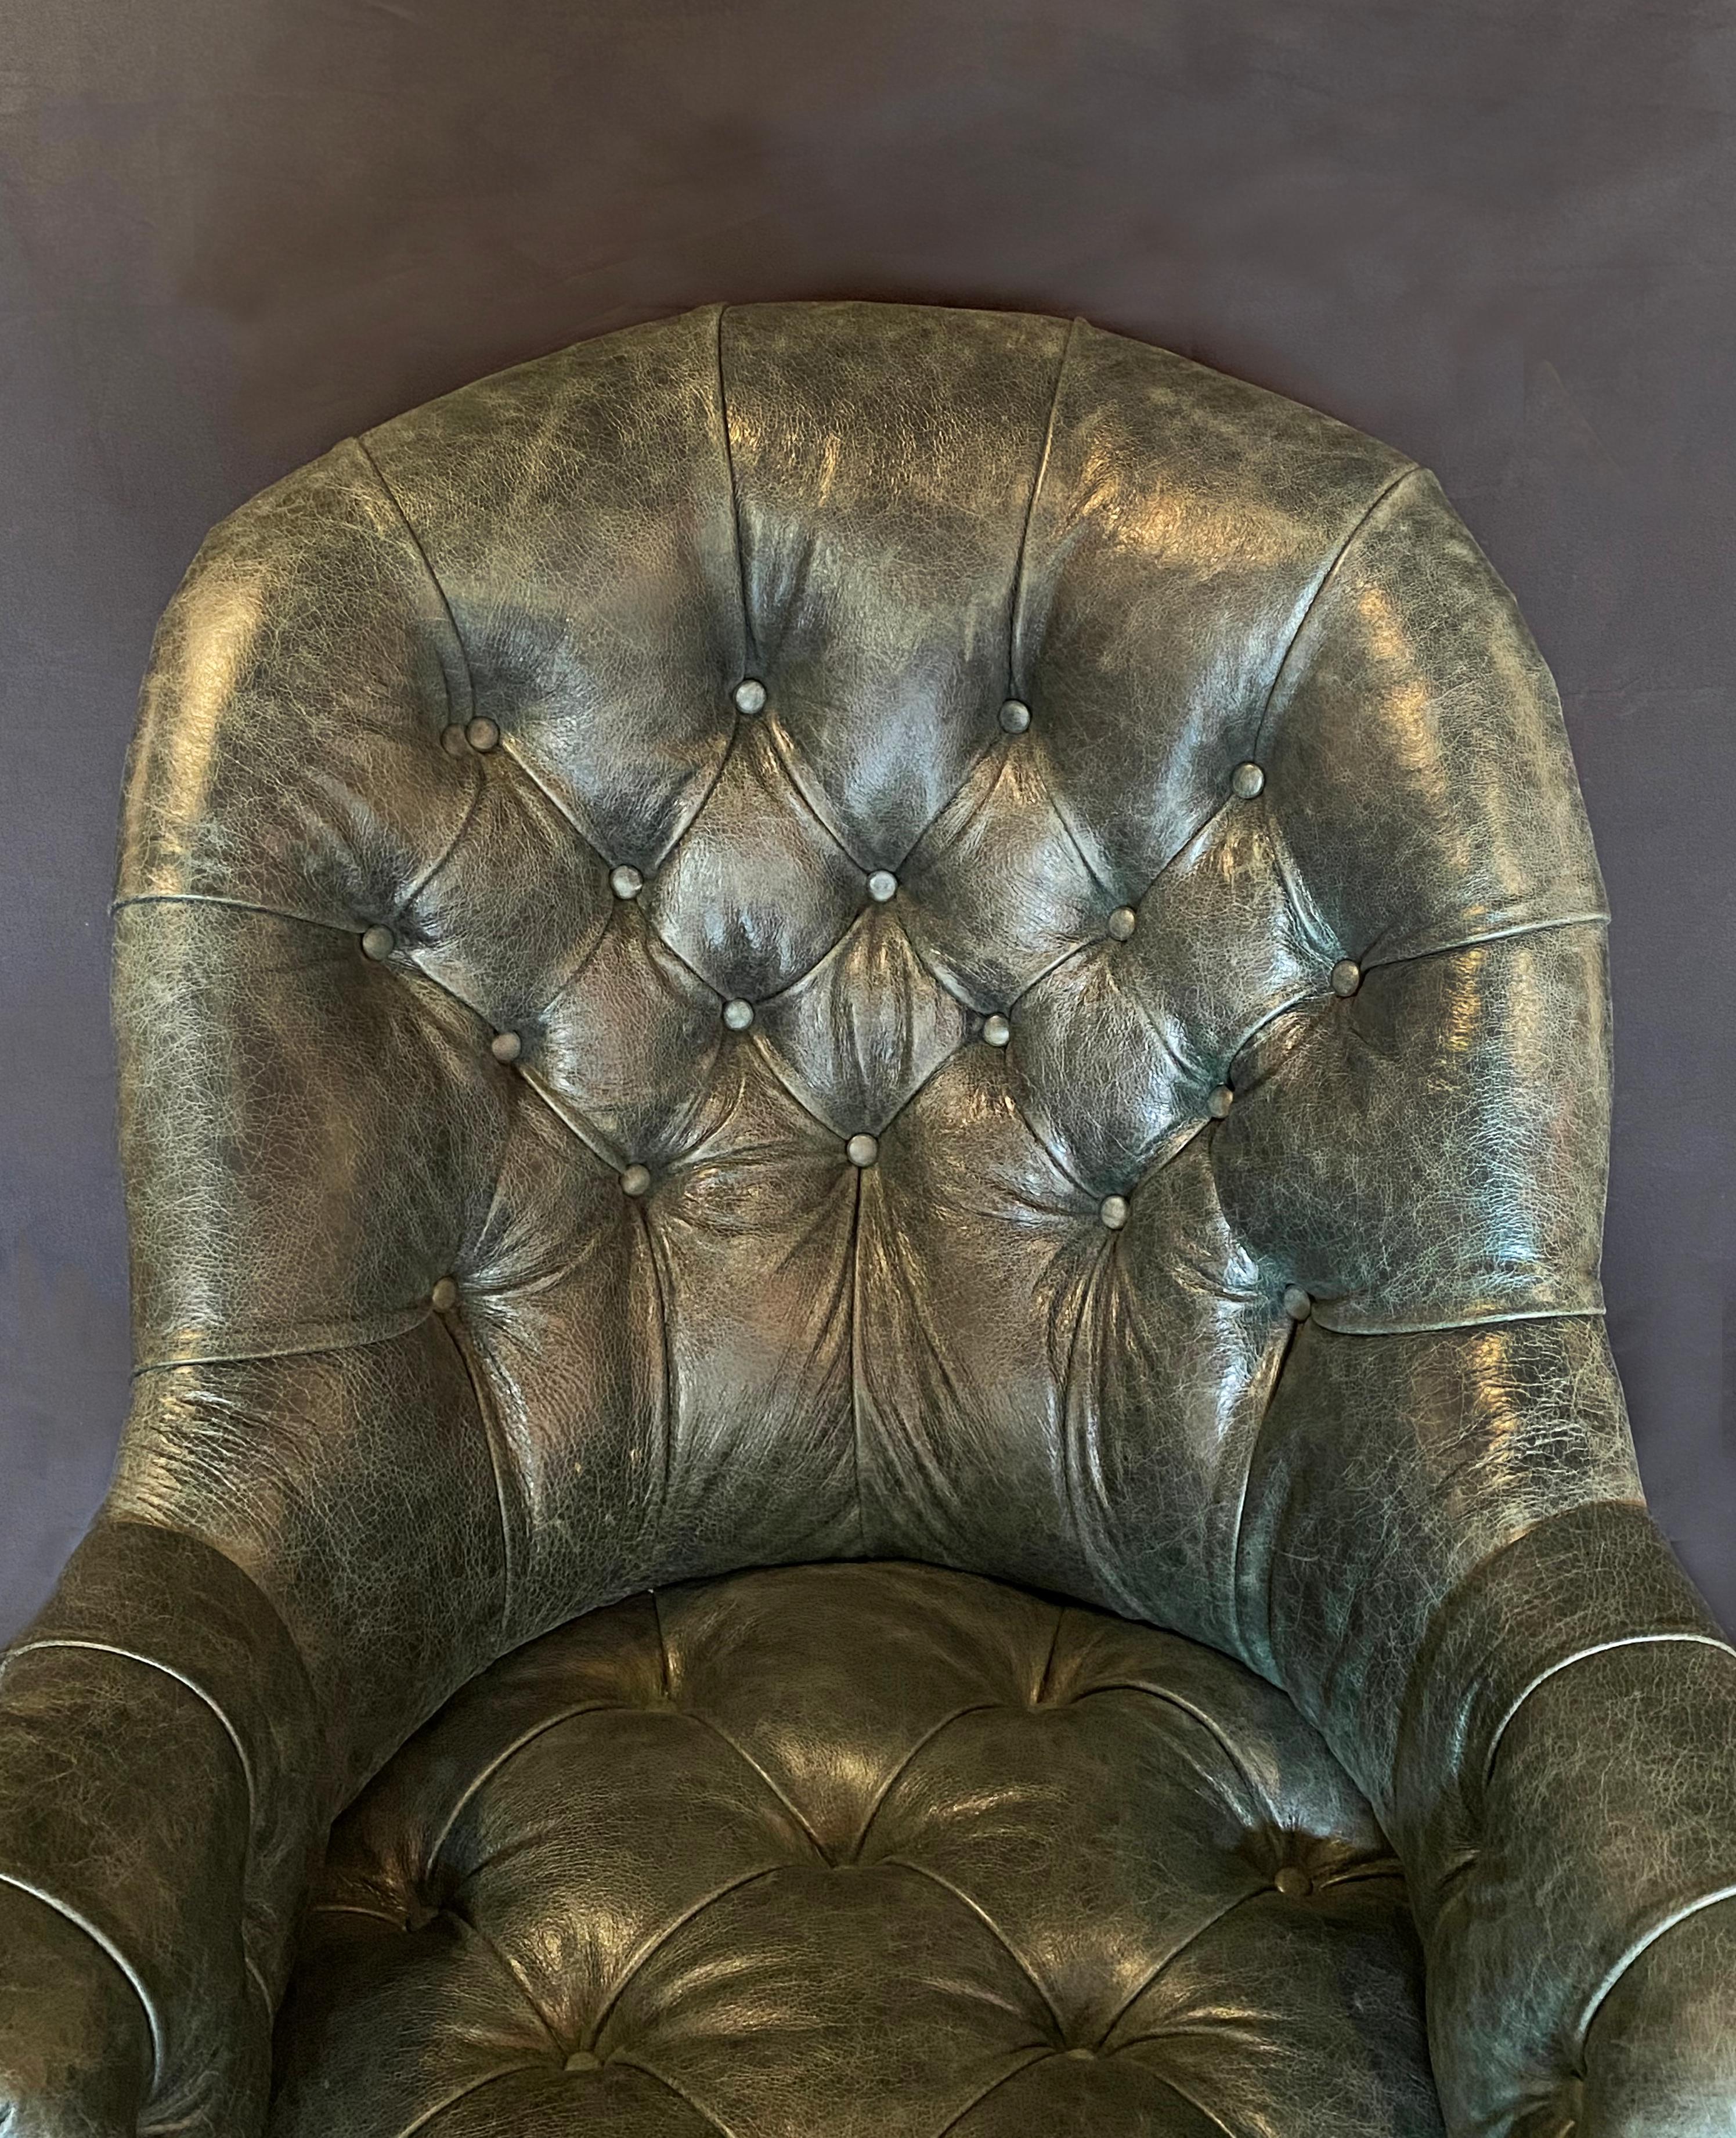 A 19th century Gillows of Lancaster walnut and leather upholstered library arm chair, with exceptional overall condition and colour. The button down deep green leather is in perfect condition and luxurious. The walnut arms have scrolled carving and